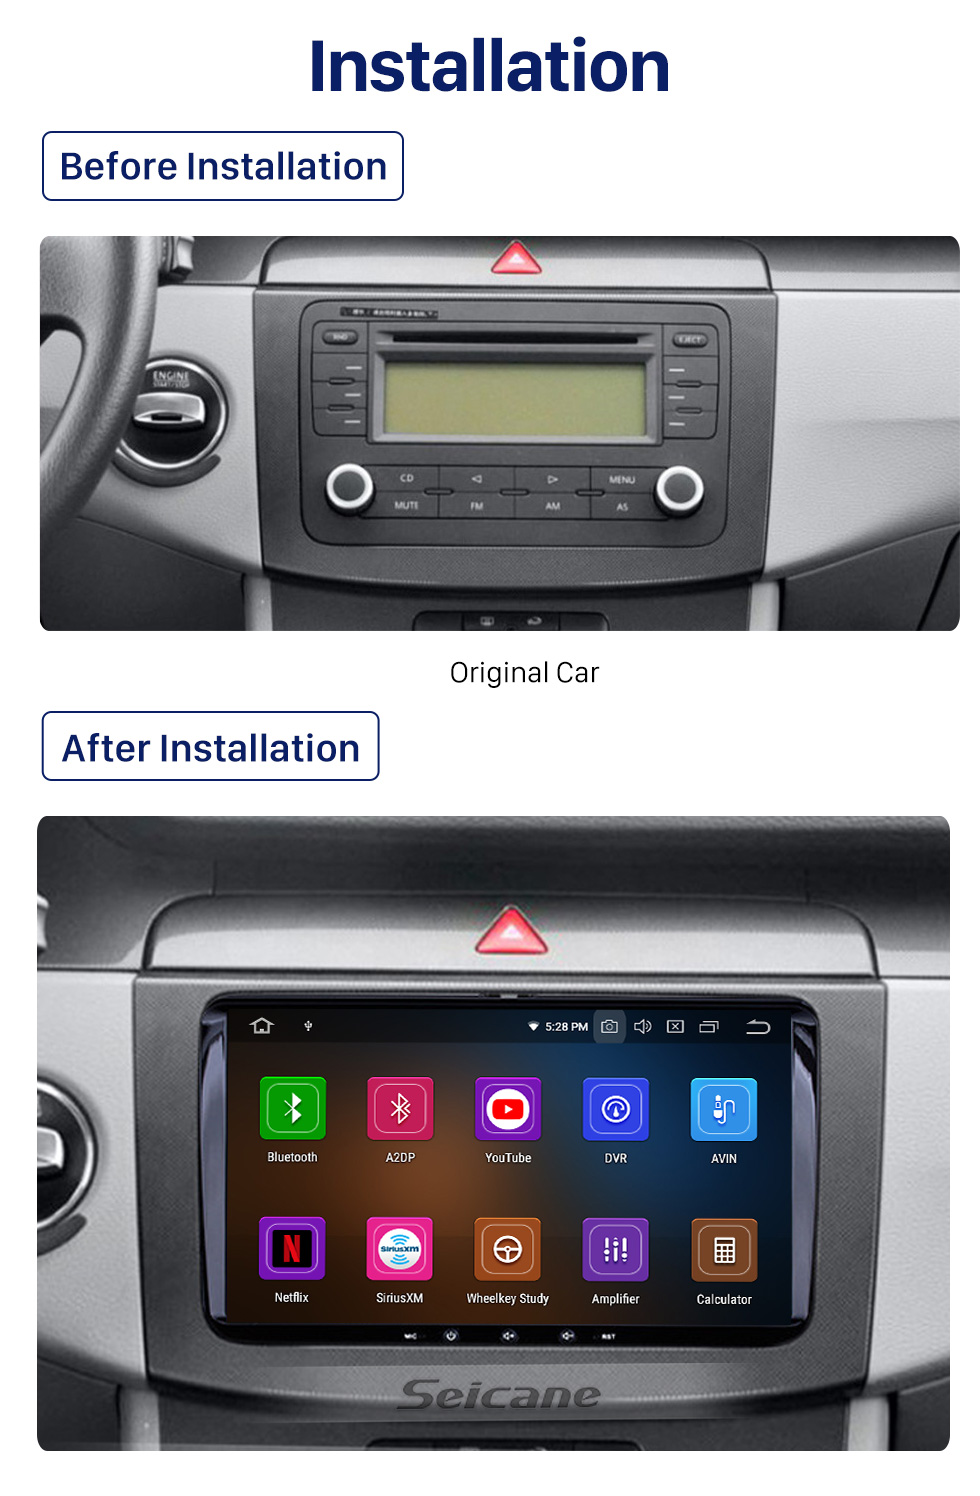 Seicane Android 10.0 GPS Navigation system for VW Volkswagen Universal SKODA Seat with DVD Player Radio Bluetooth Mirror Link OBD2 DVR Rearview Camera Steering wheel control 3G WiFi